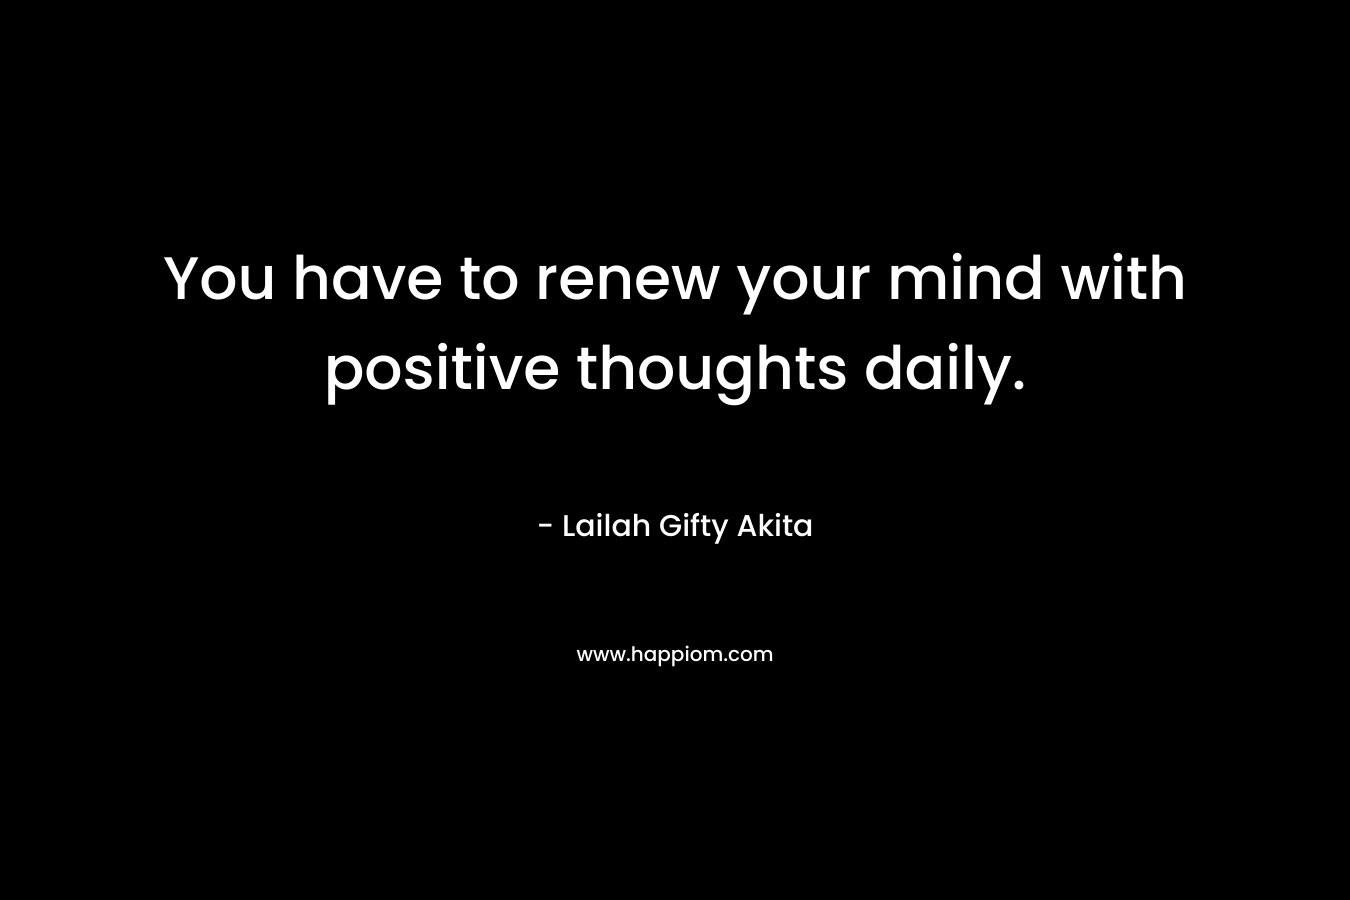 You have to renew your mind with positive thoughts daily. – Lailah Gifty Akita